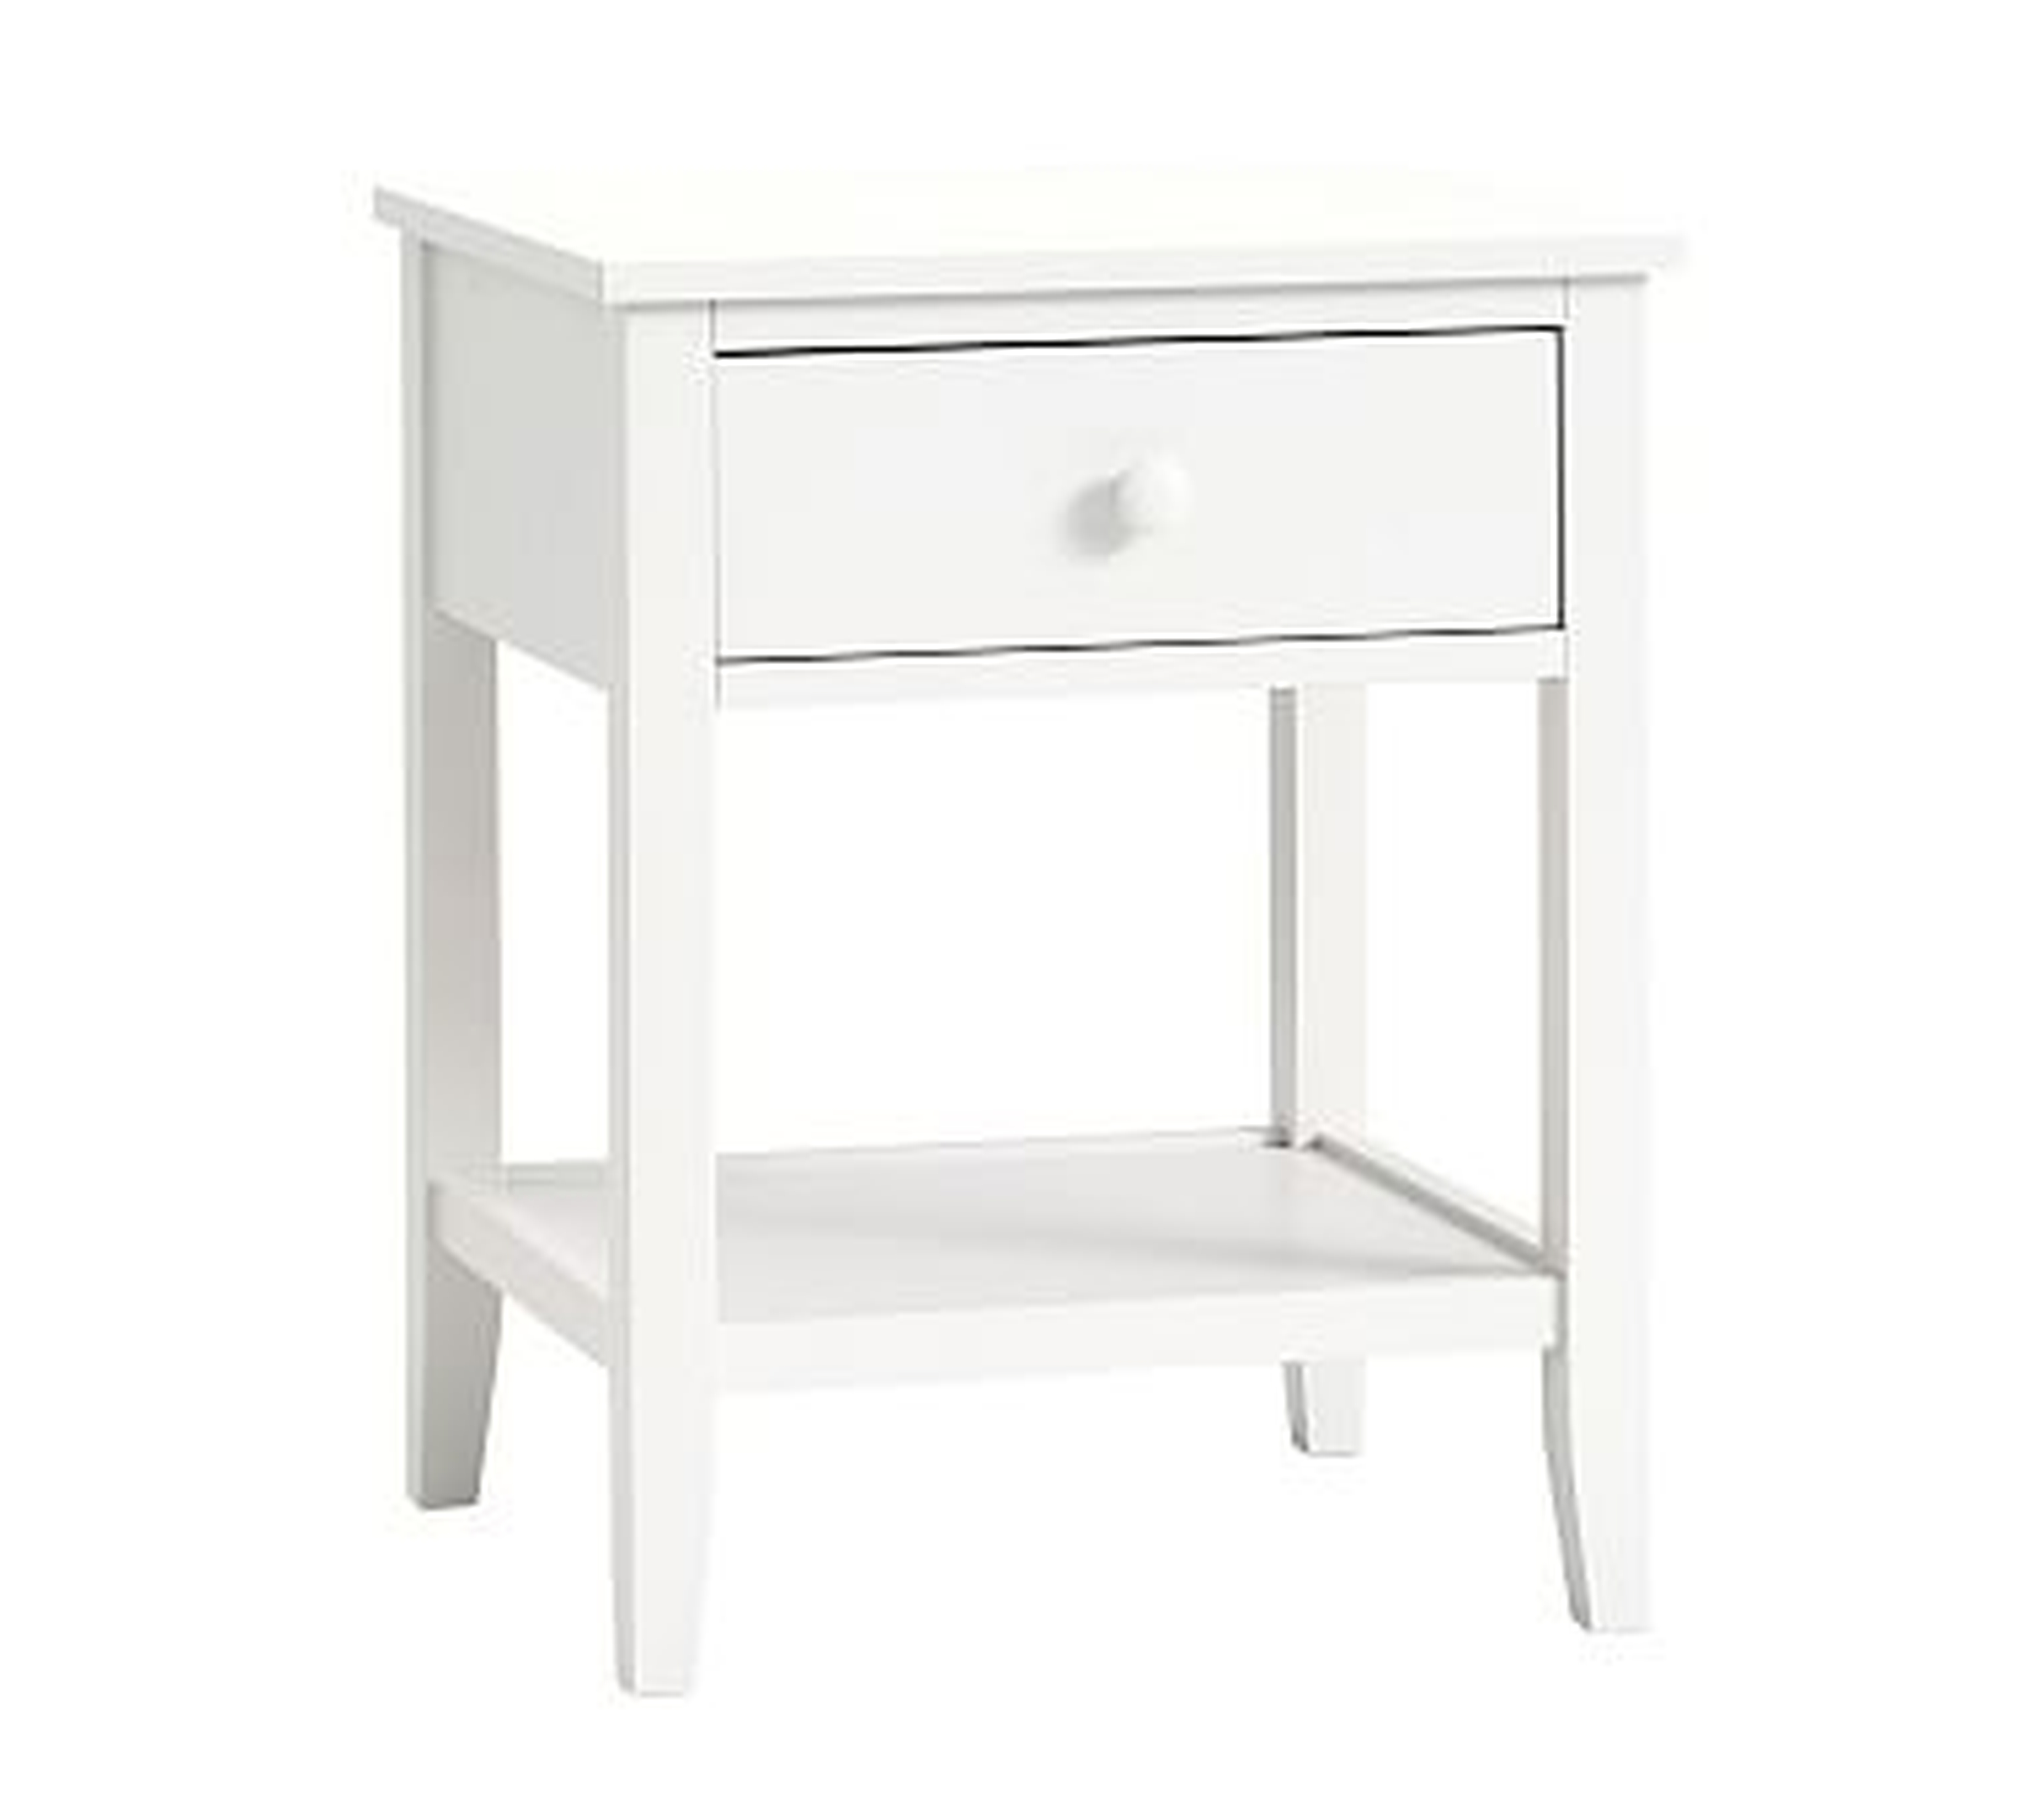 Emerson Nightstand, Simply White, UPS - Pottery Barn Kids